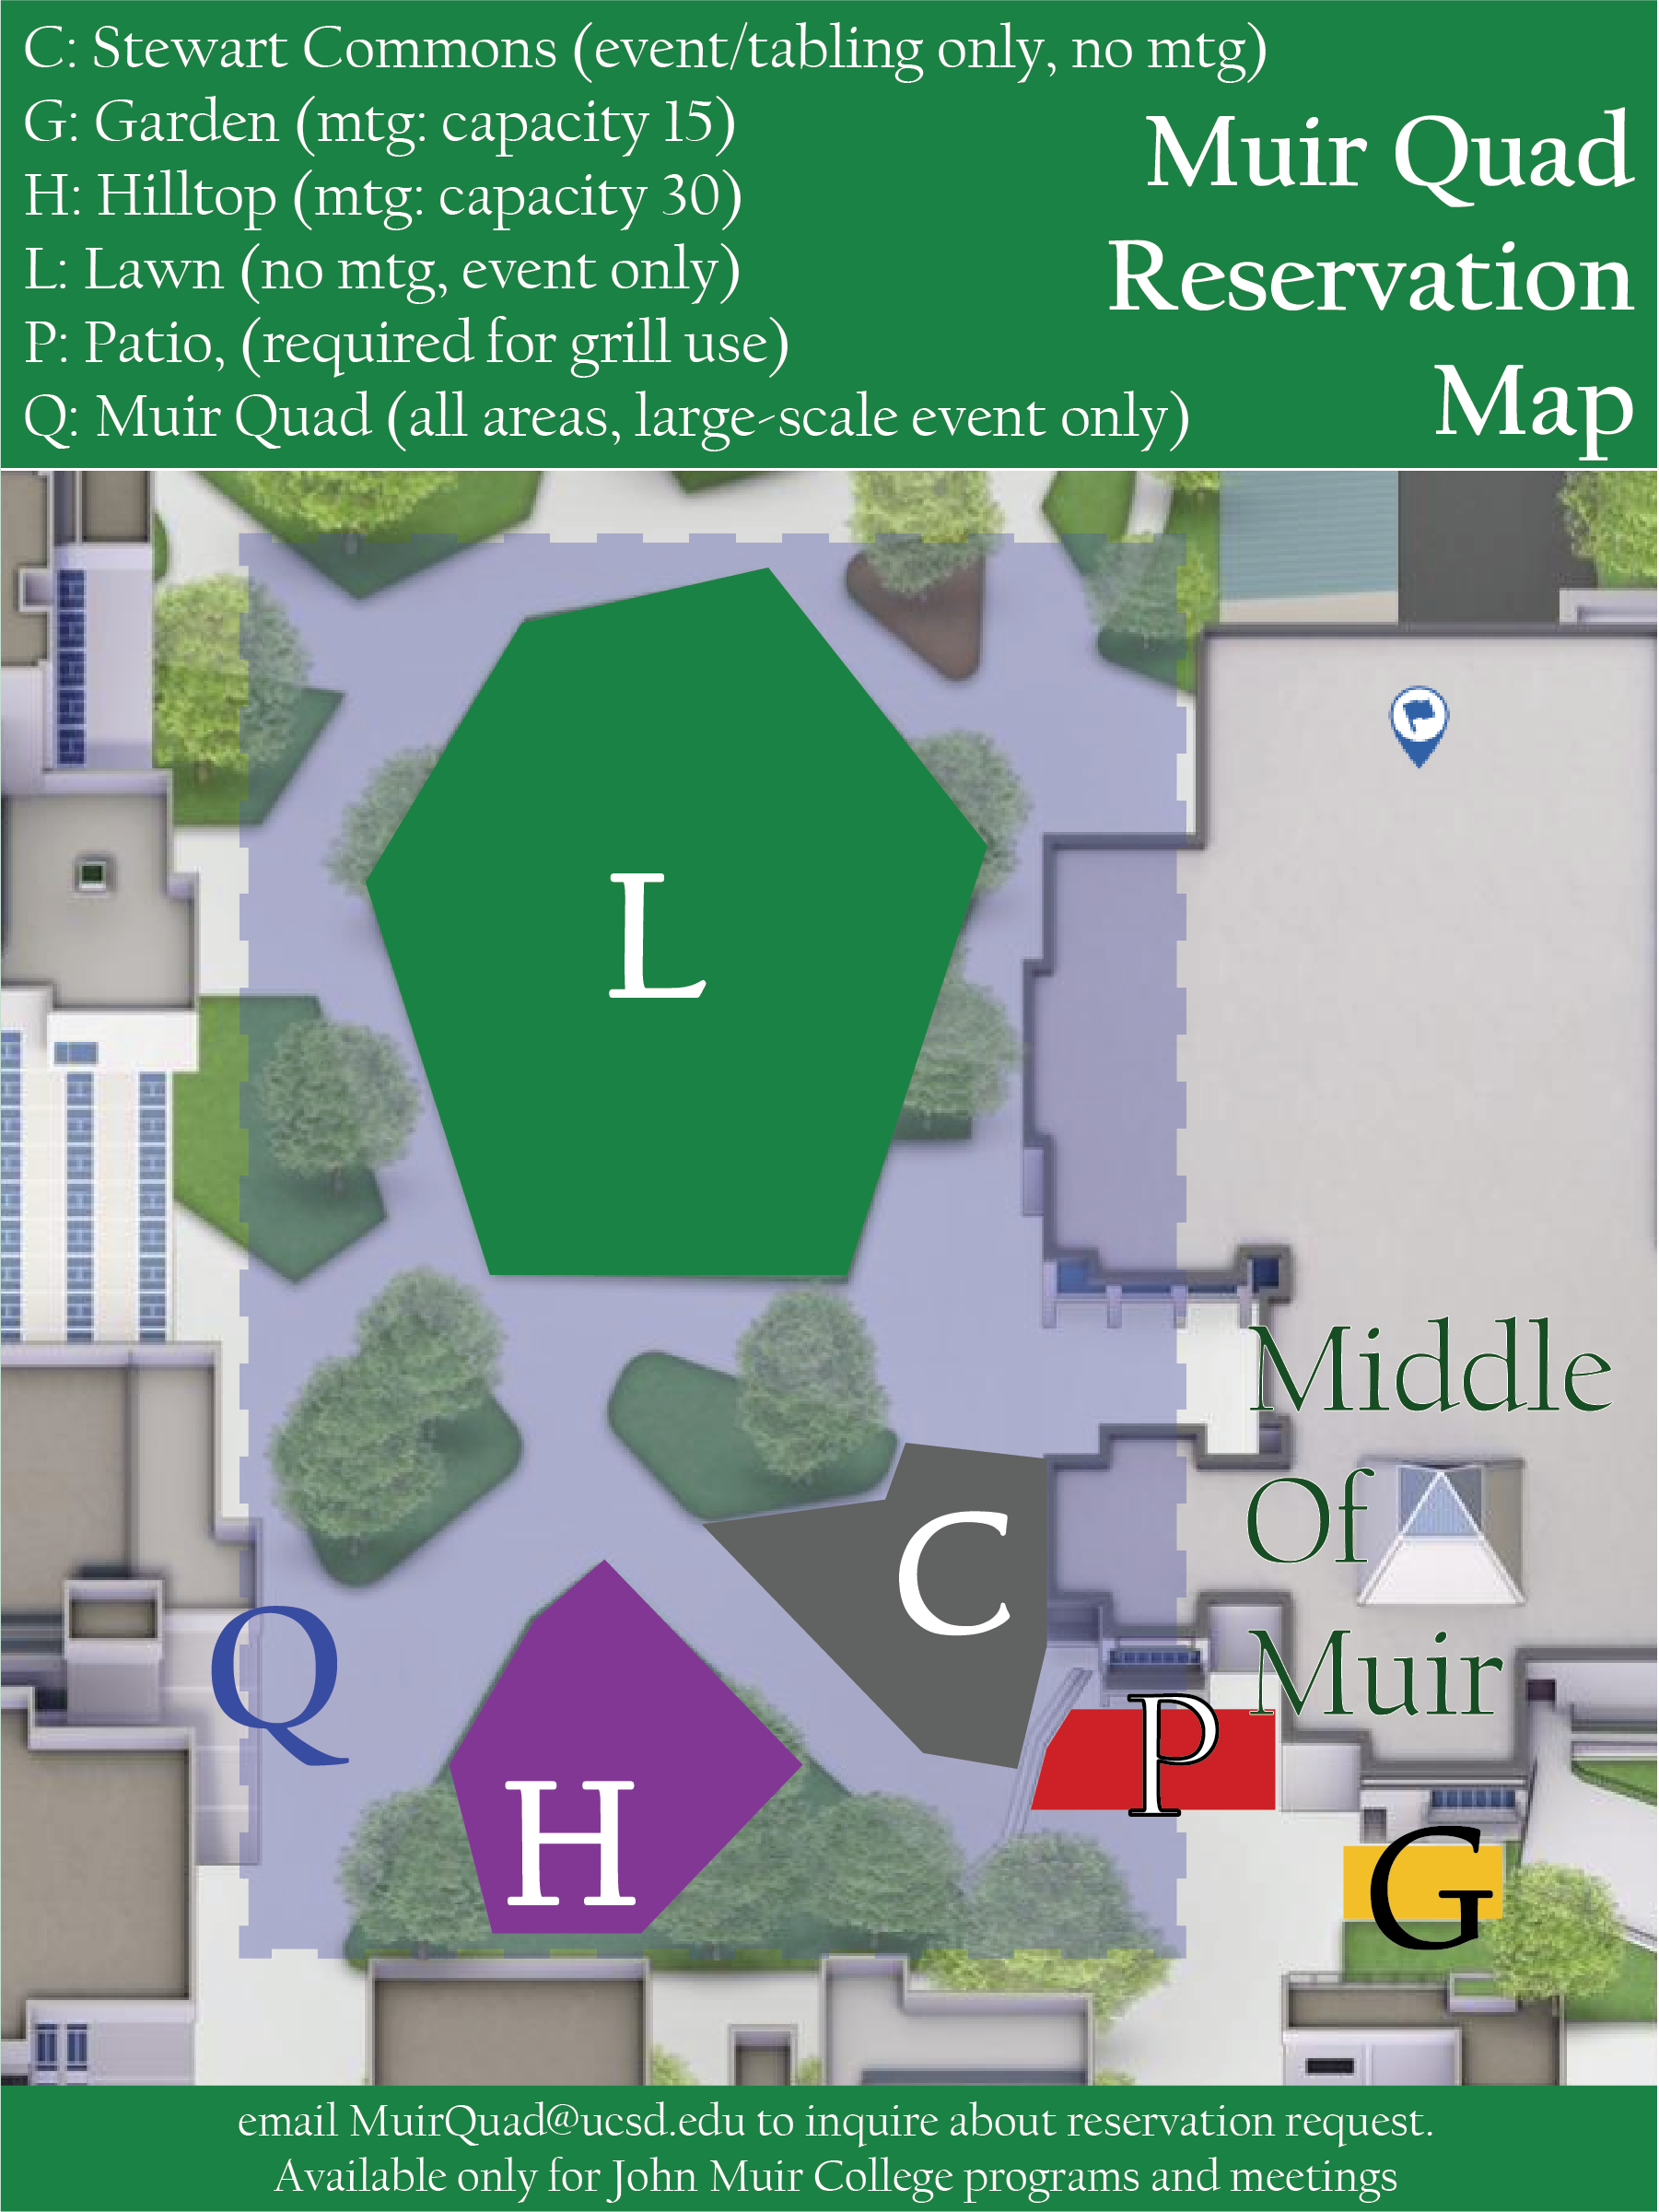 MOM-Quad-reservations-map-WI24.png